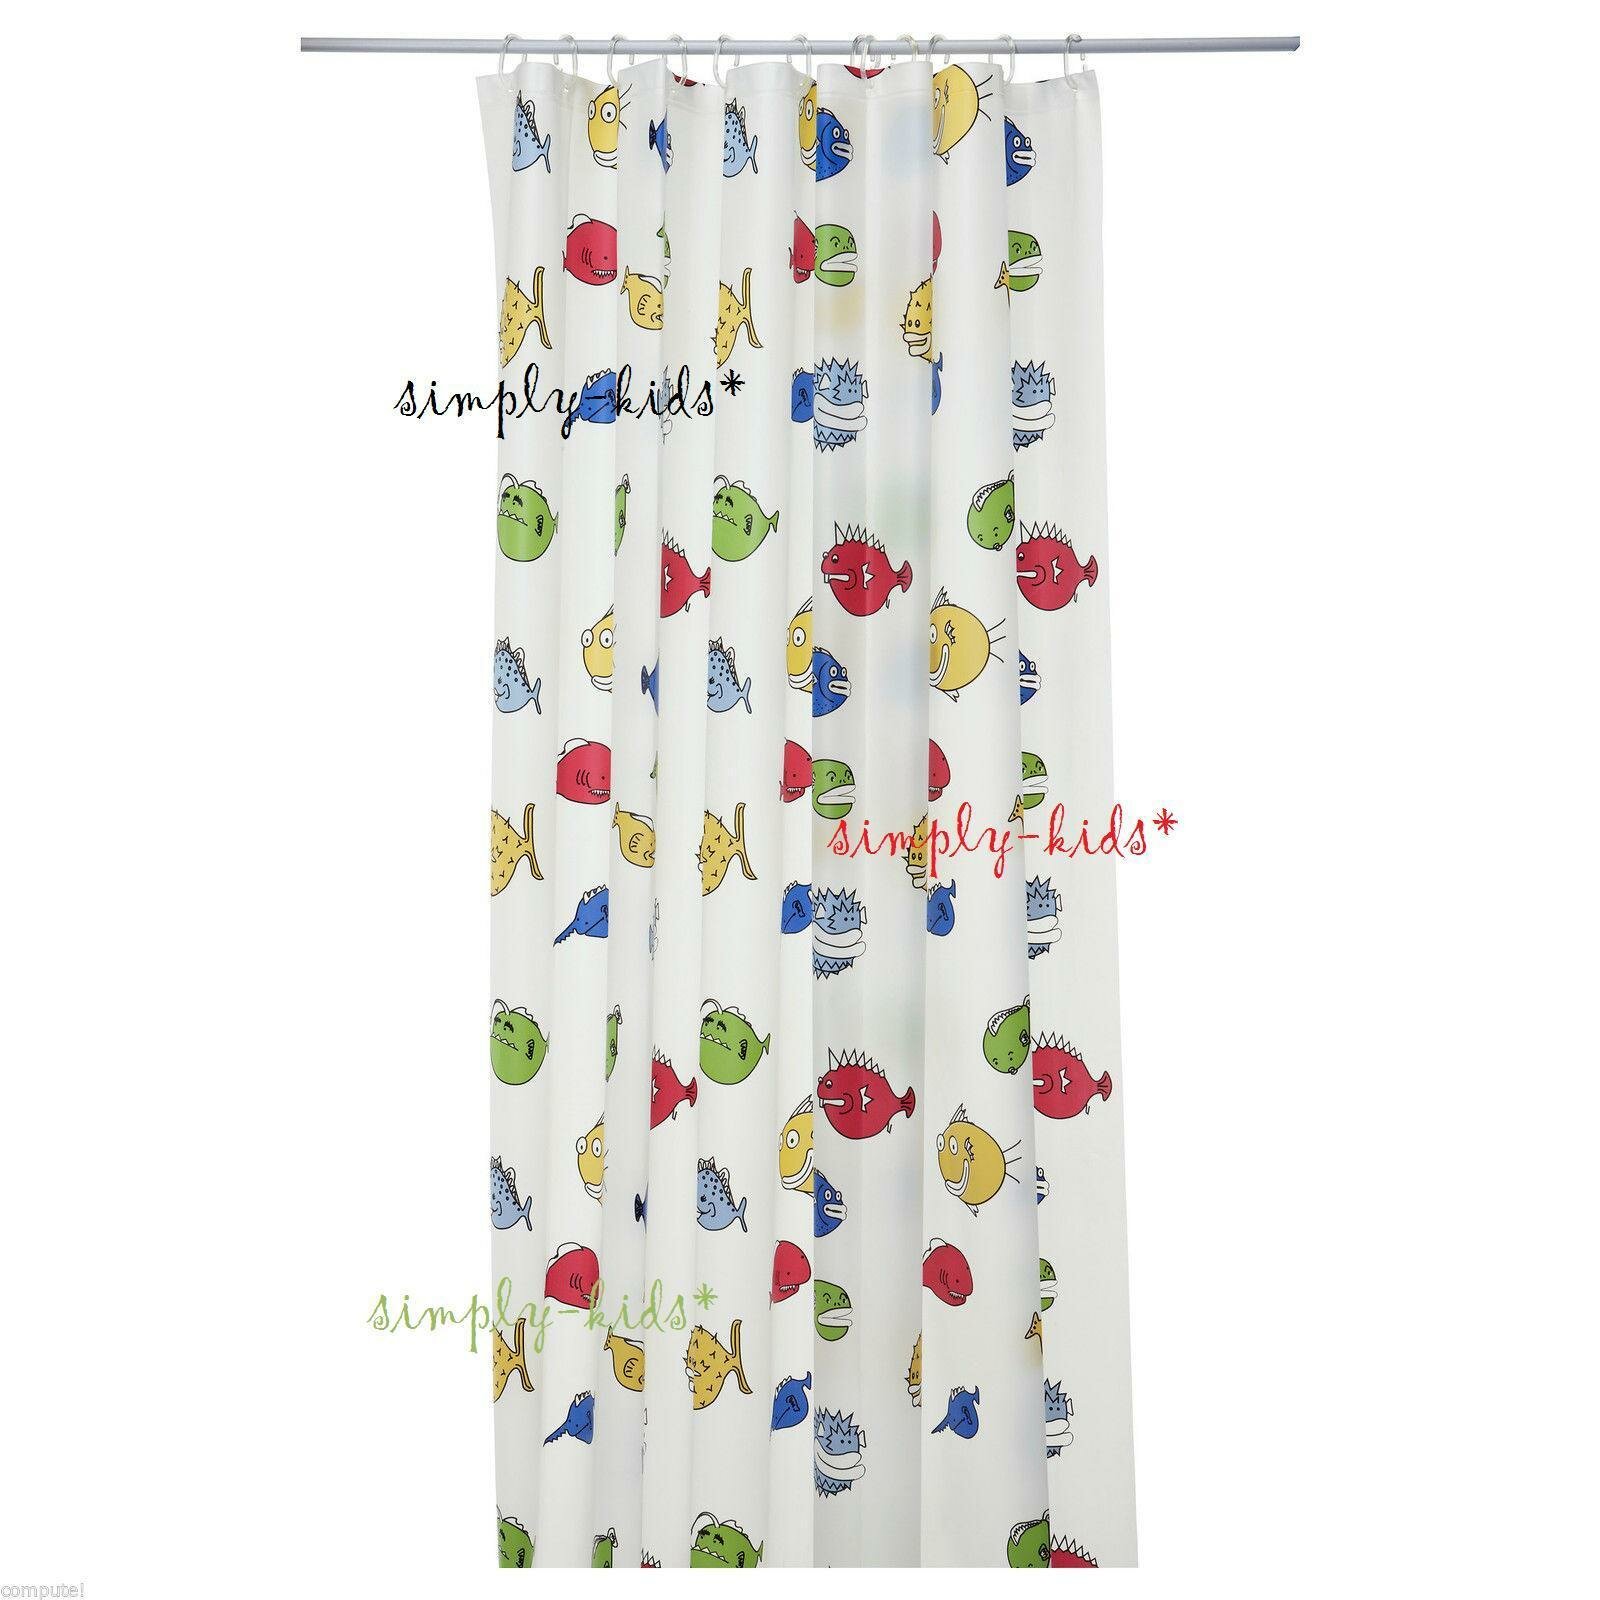 Shower Curtain Height | Ikea Shower Curtain | Shower Curtains 80 Inches Long